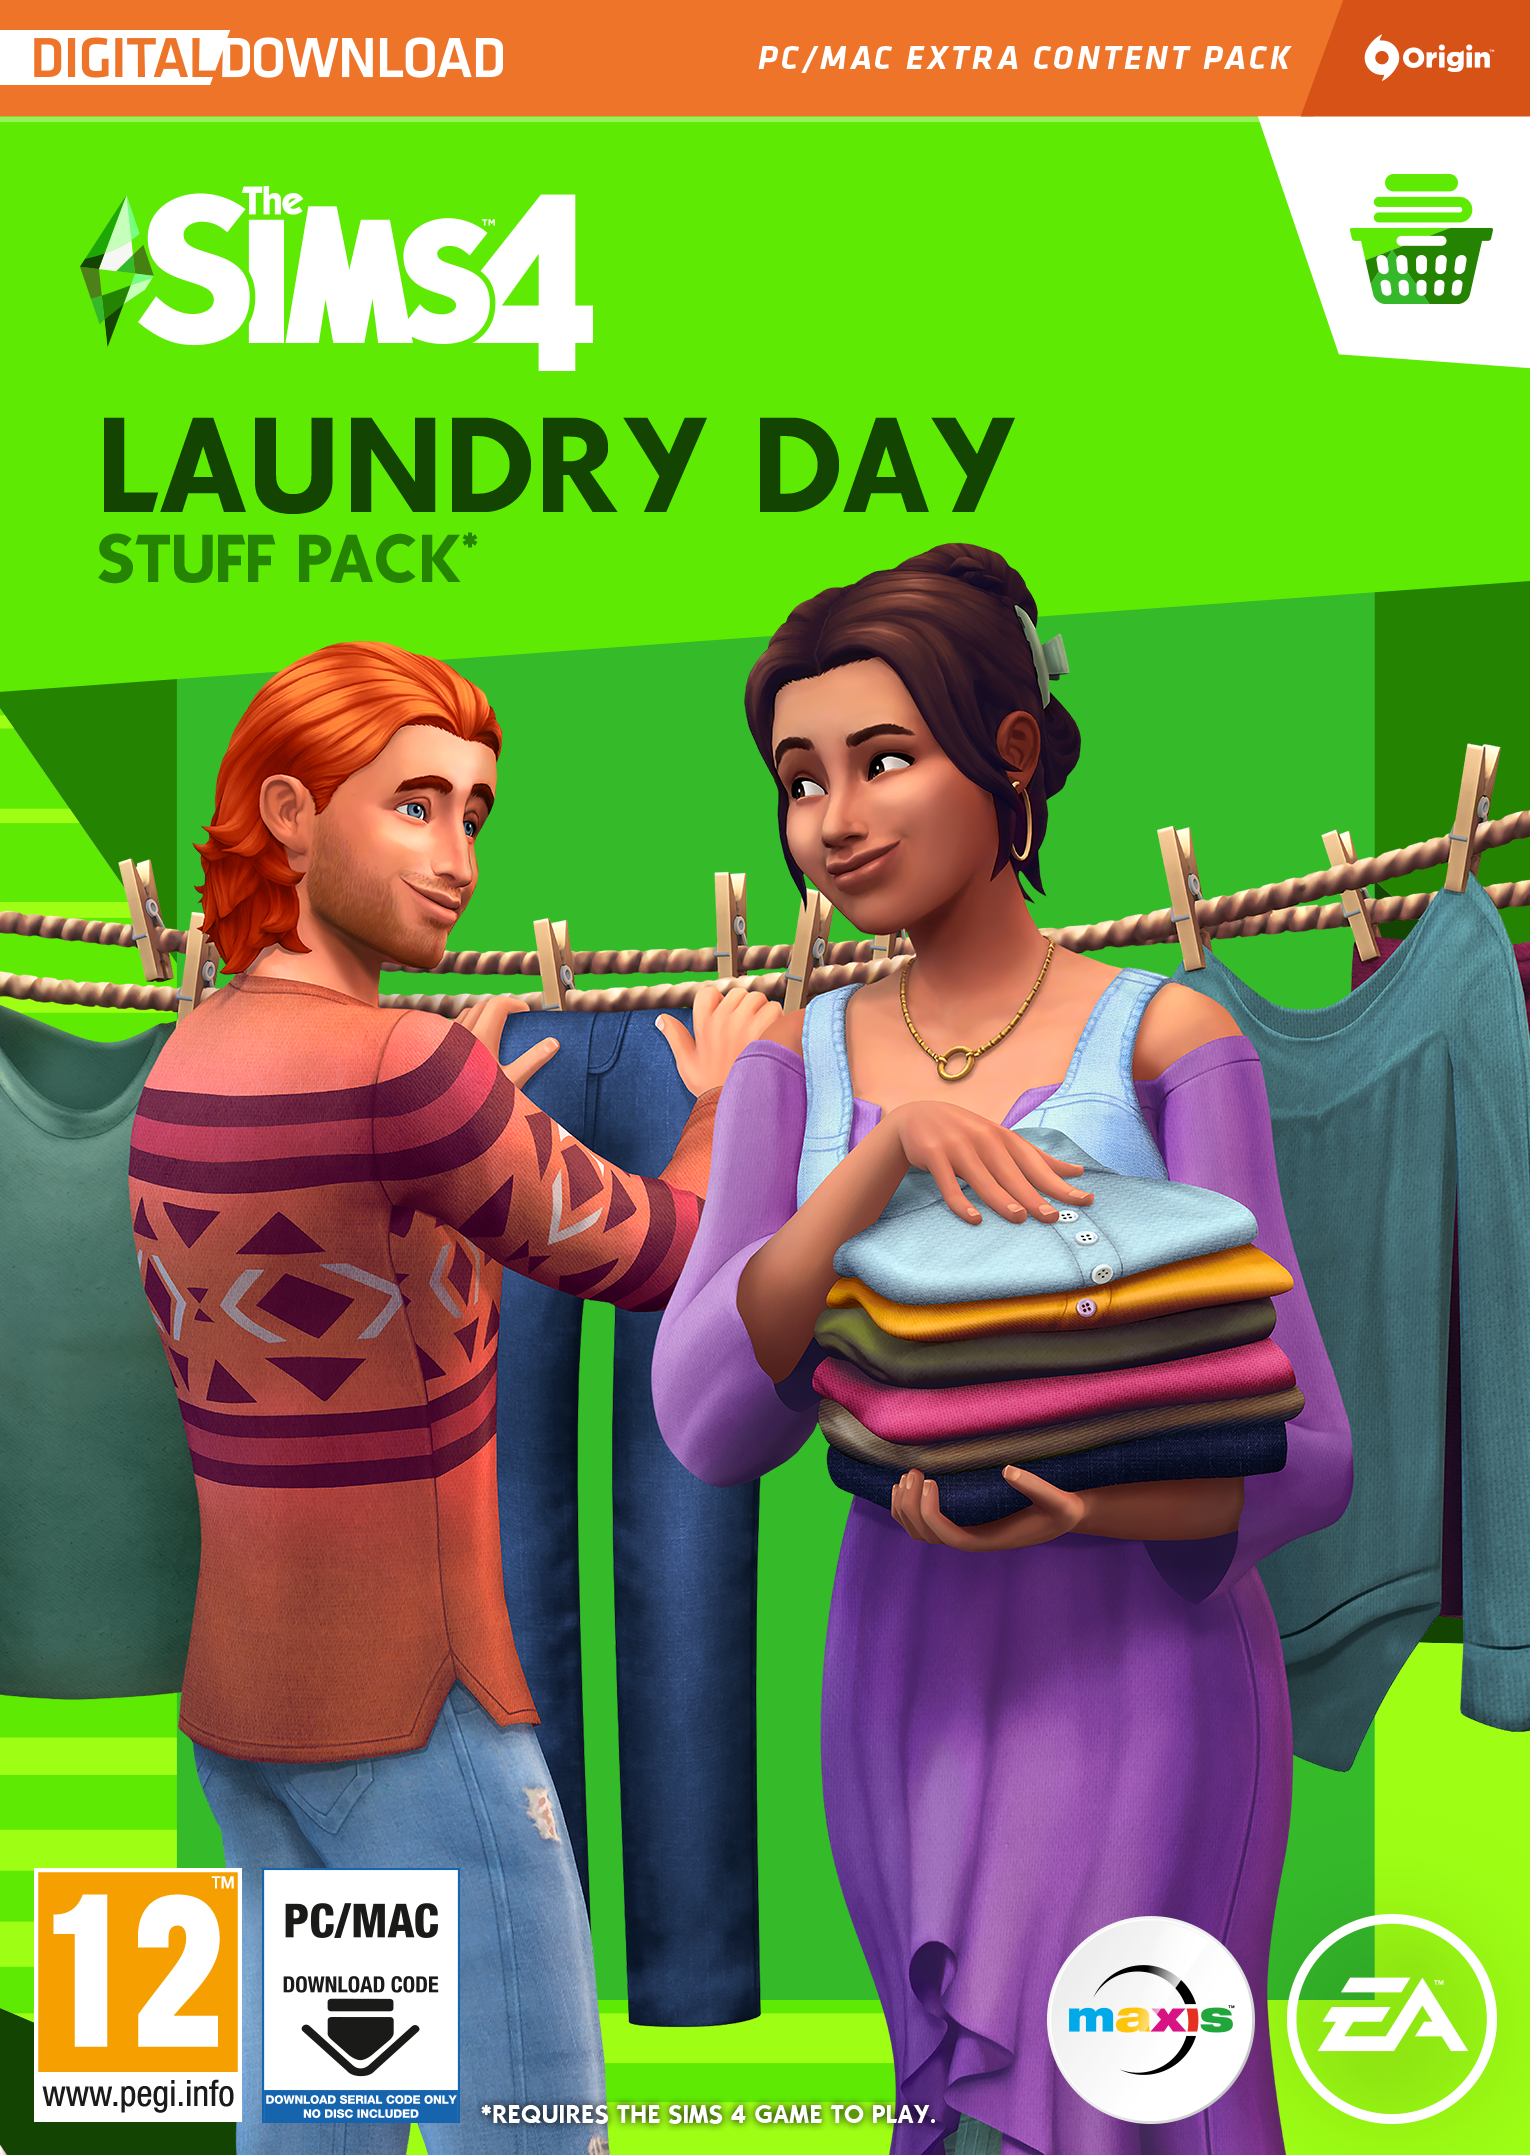 THE SIMS 4 (SP13) LAUNDRY DAY STUFF